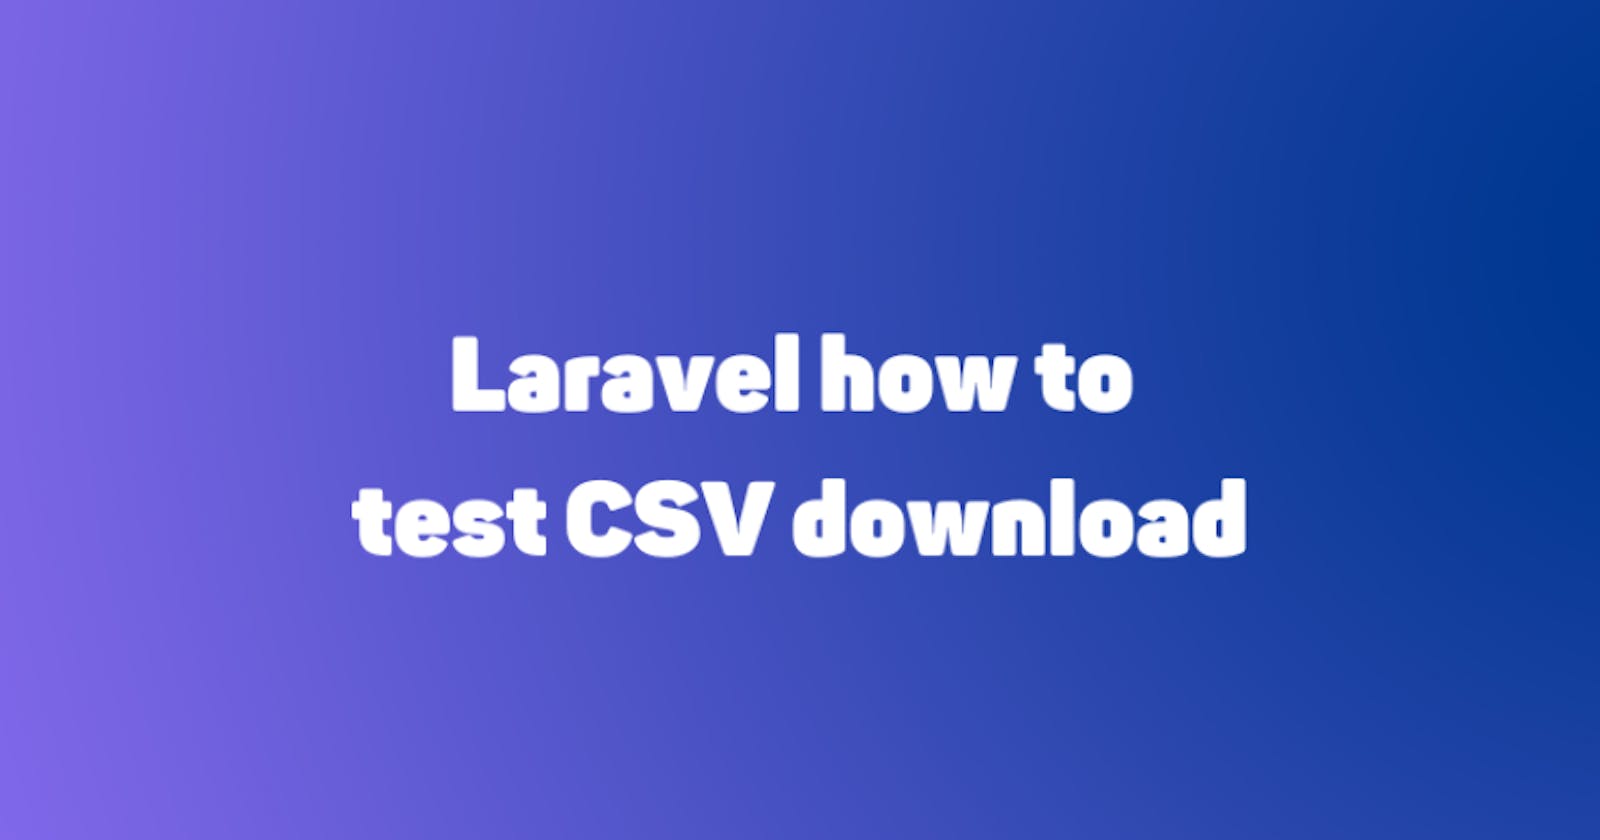 Laravel how to test CSV download